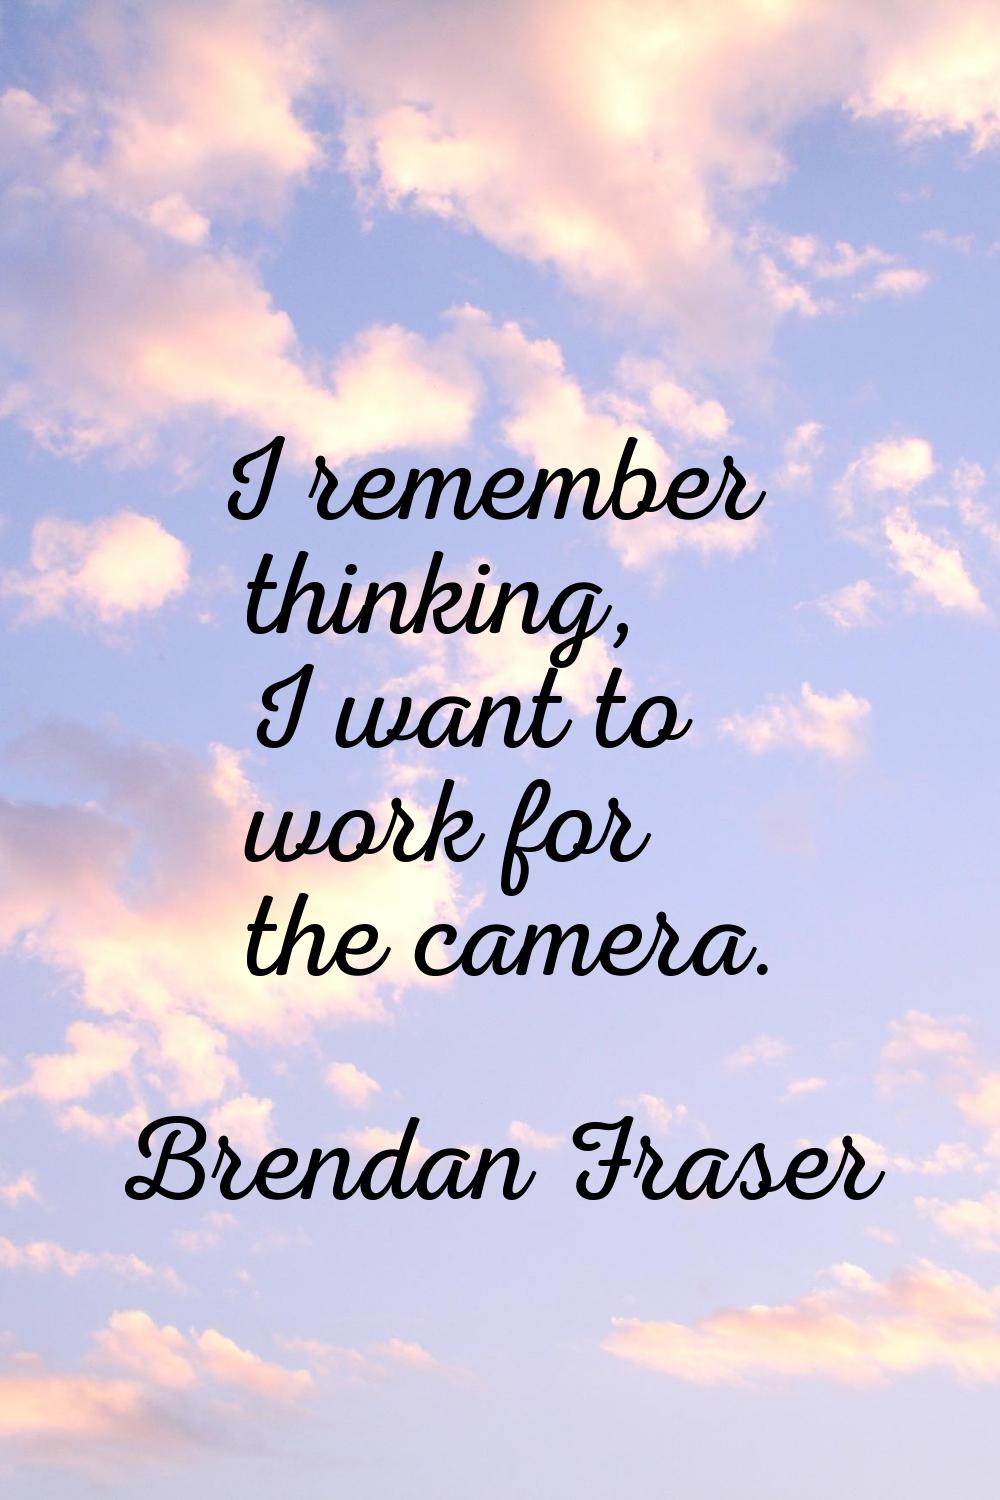 I remember thinking, I want to work for the camera.